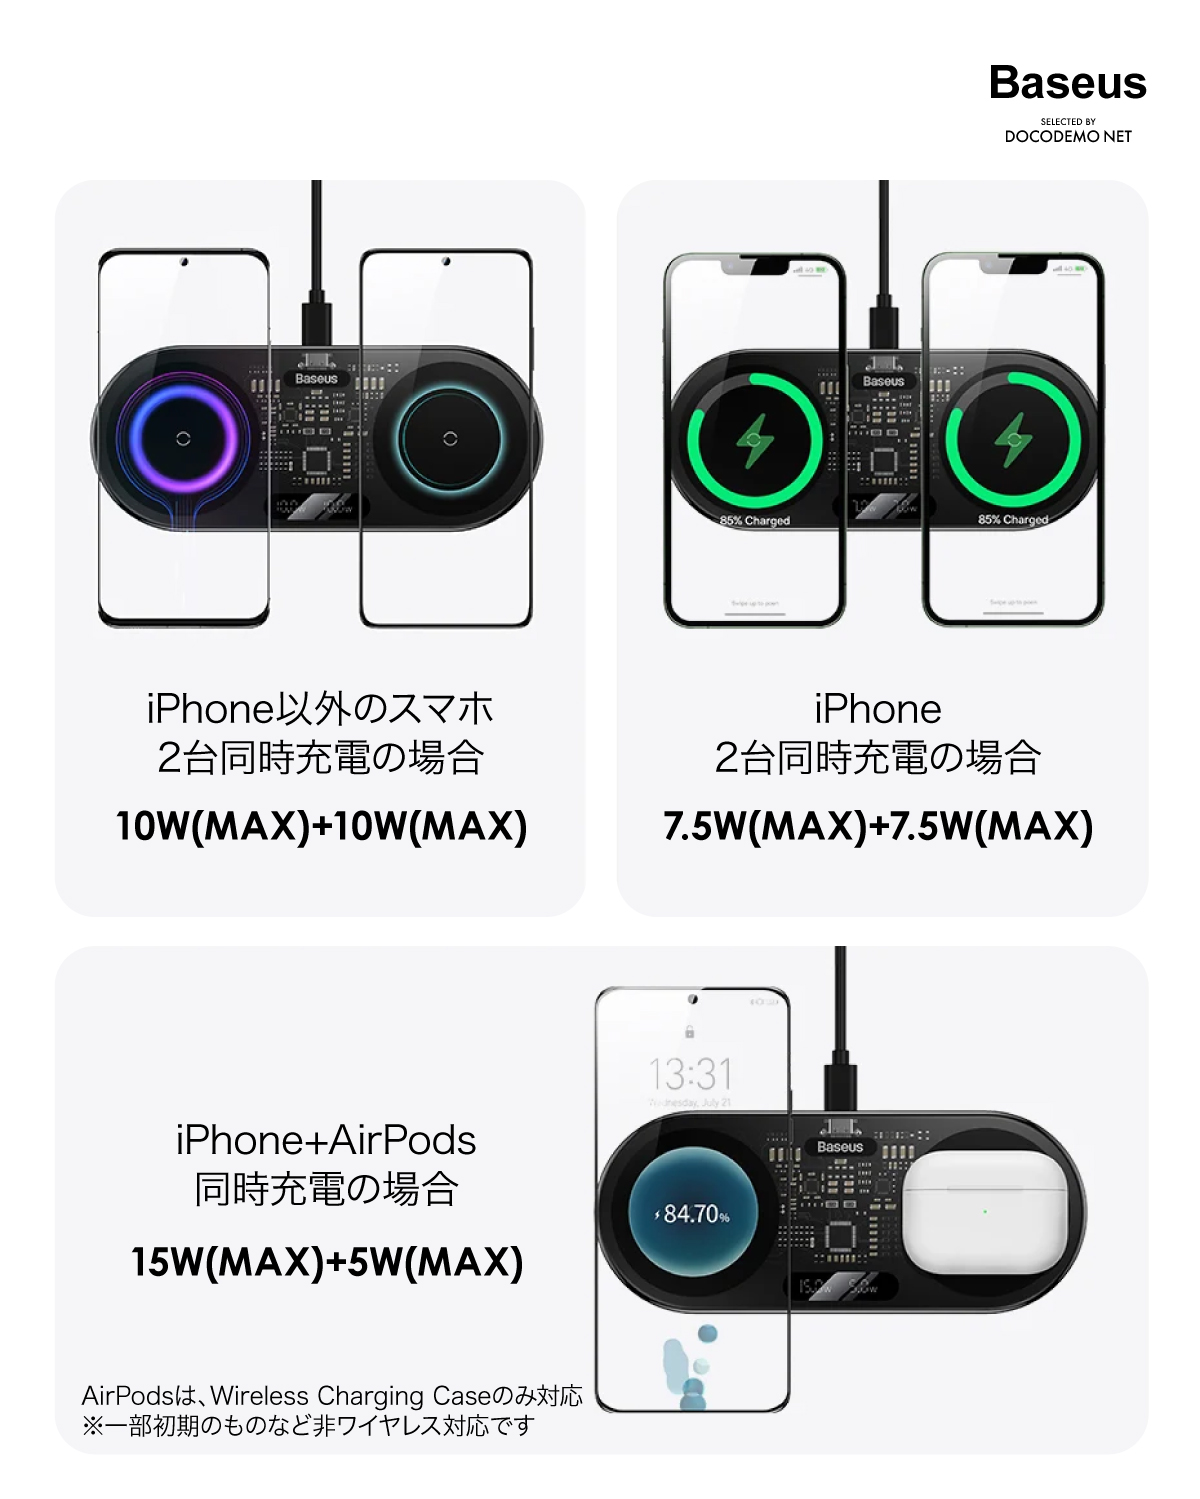 iPhone 14 ワイヤレス充電器 Baseus iPhone 2台同時急速充電 Wワット数表記 最大20W  2in1【本体透明仕様】スケルトン 置くだけ充電 スリム 7mm薄型 Qi充電器 無線充電器 iPhone Android iPhone 14 13  12 pro max plus Pixel Galaxy Airpods pro どこでもネット